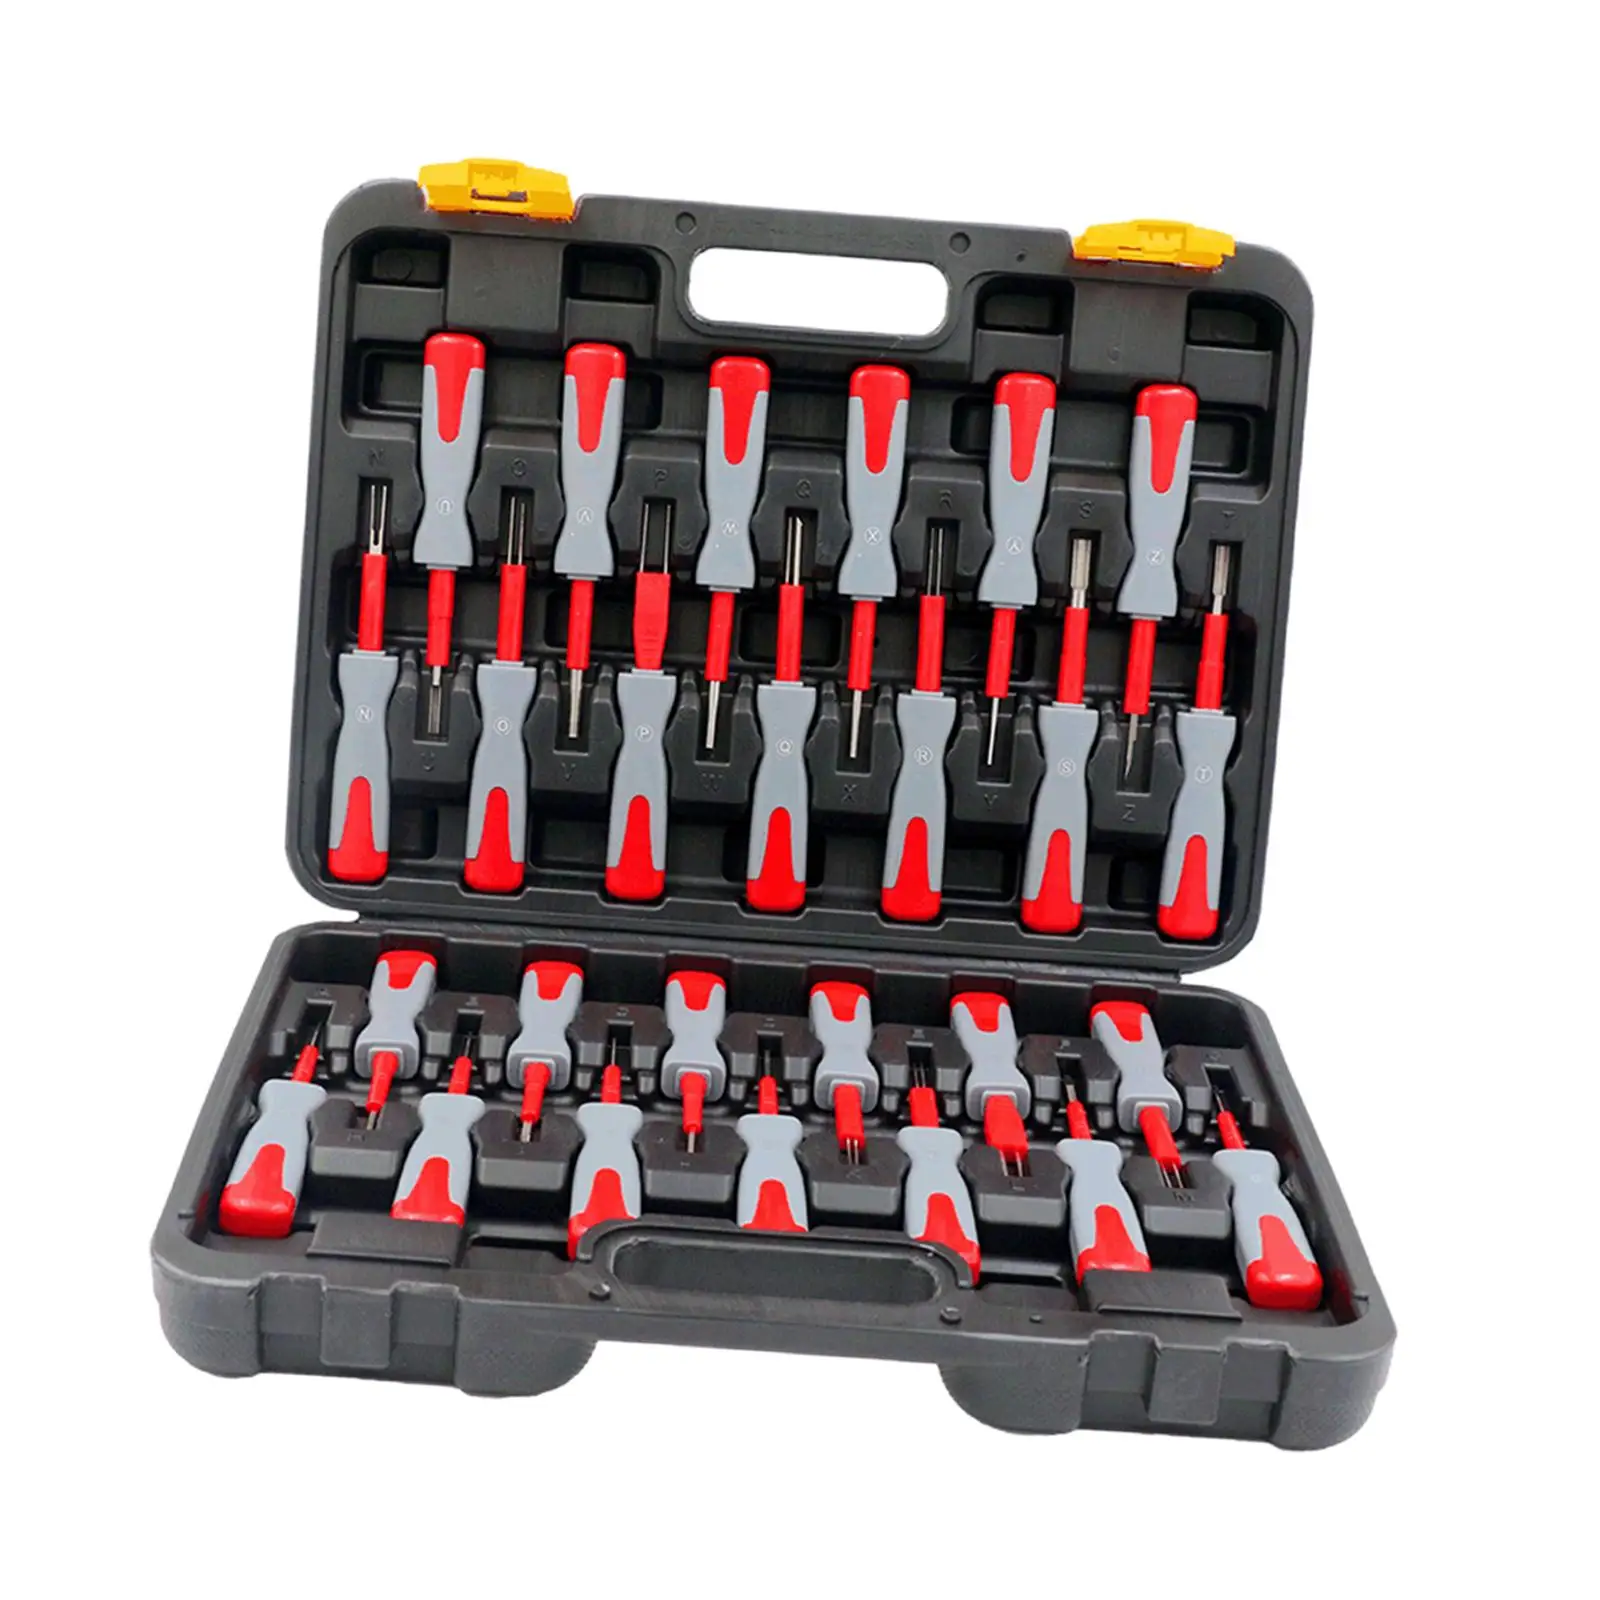 26x Car Terminal Removal Tool Kit Electrical Removal Tools Car Repair Extractor Other Household Devices Ejector Carrying Case